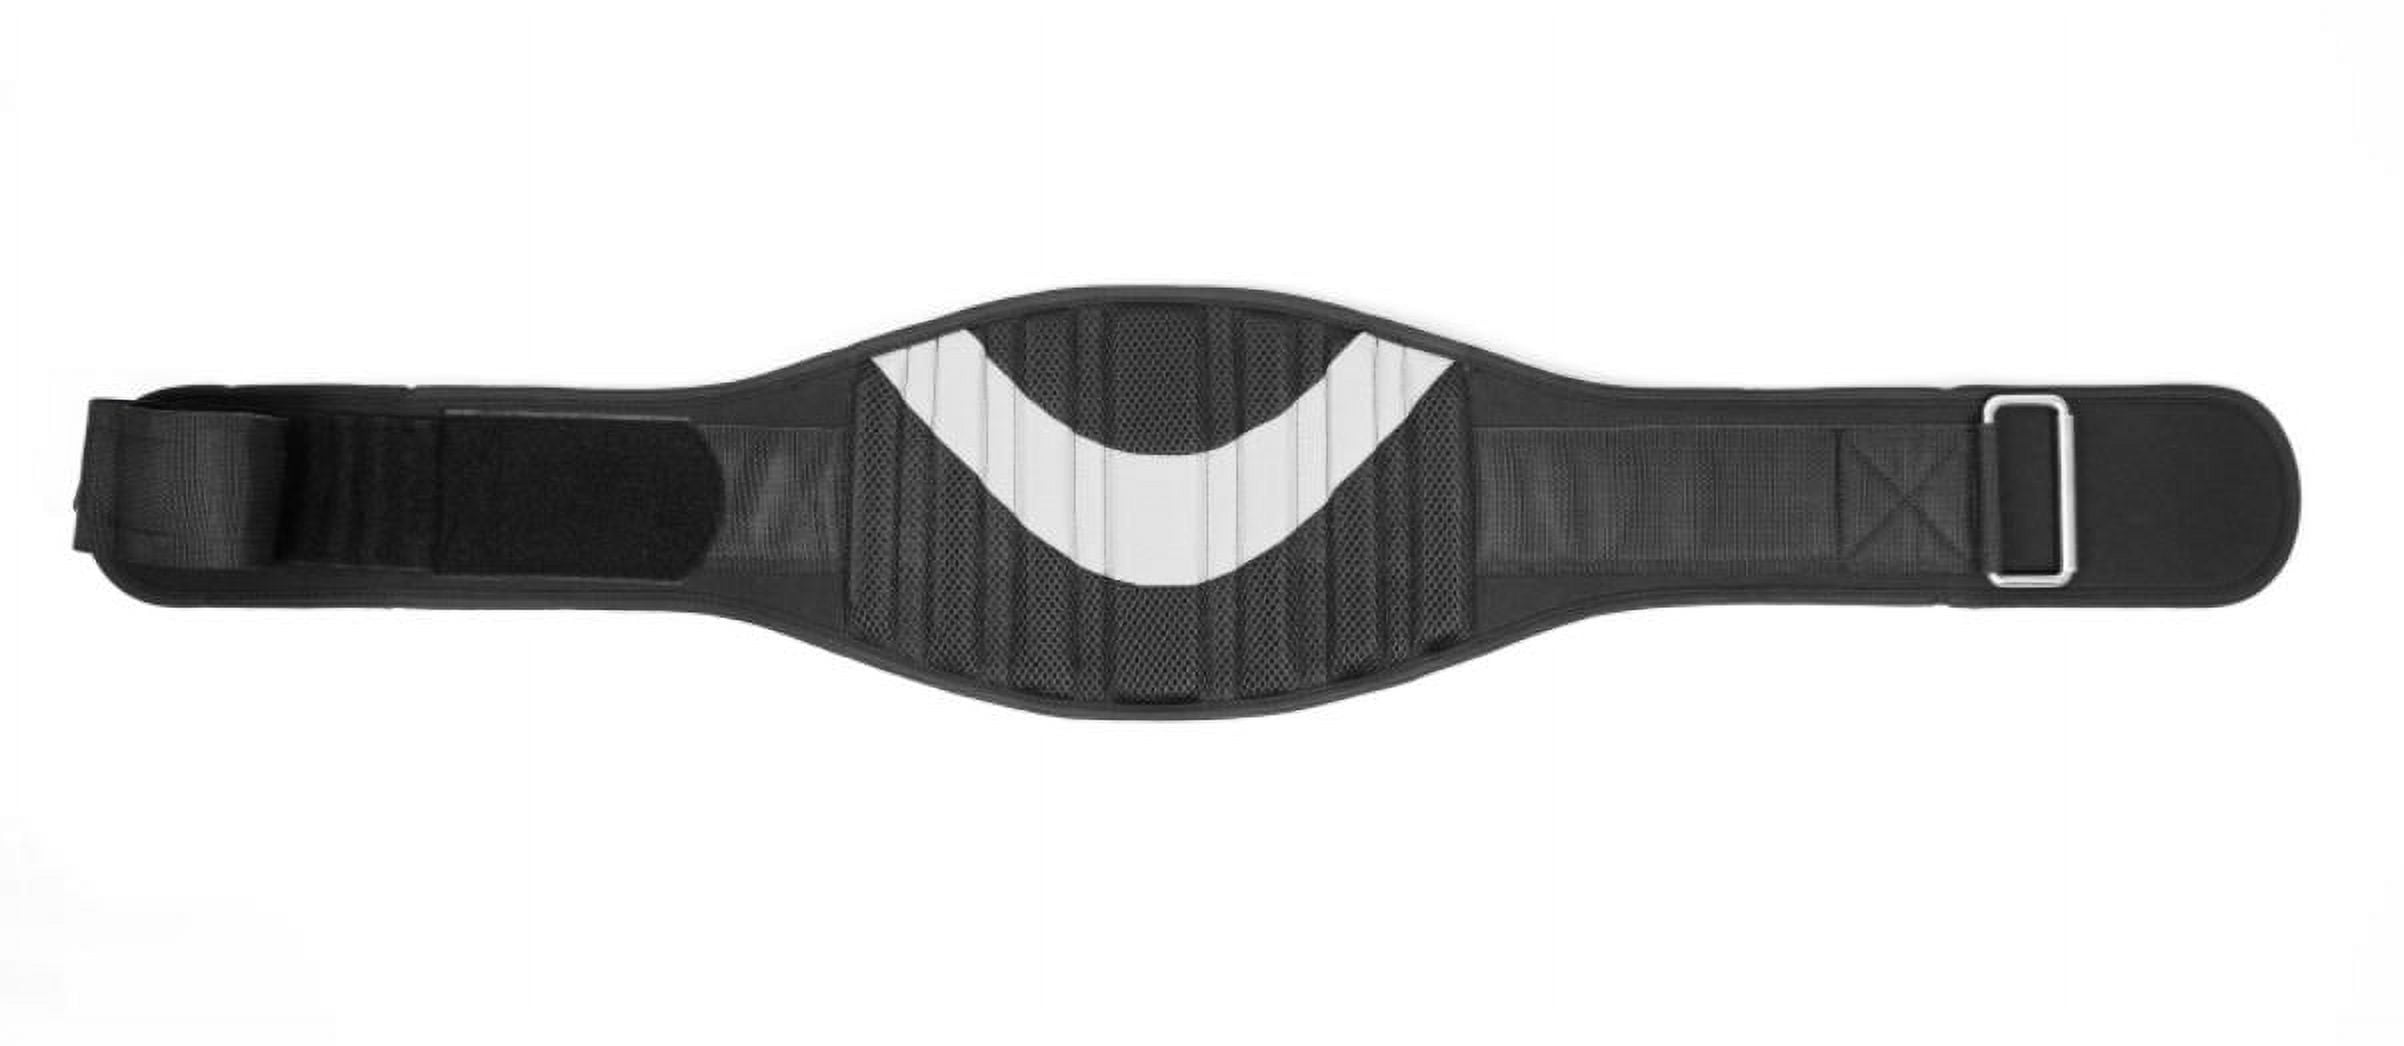 Athletic Works Weightlifting Belt, Large/ XL in black & gray color, ideal  for male with waist 34in to 48in. Contoured form with padding for better